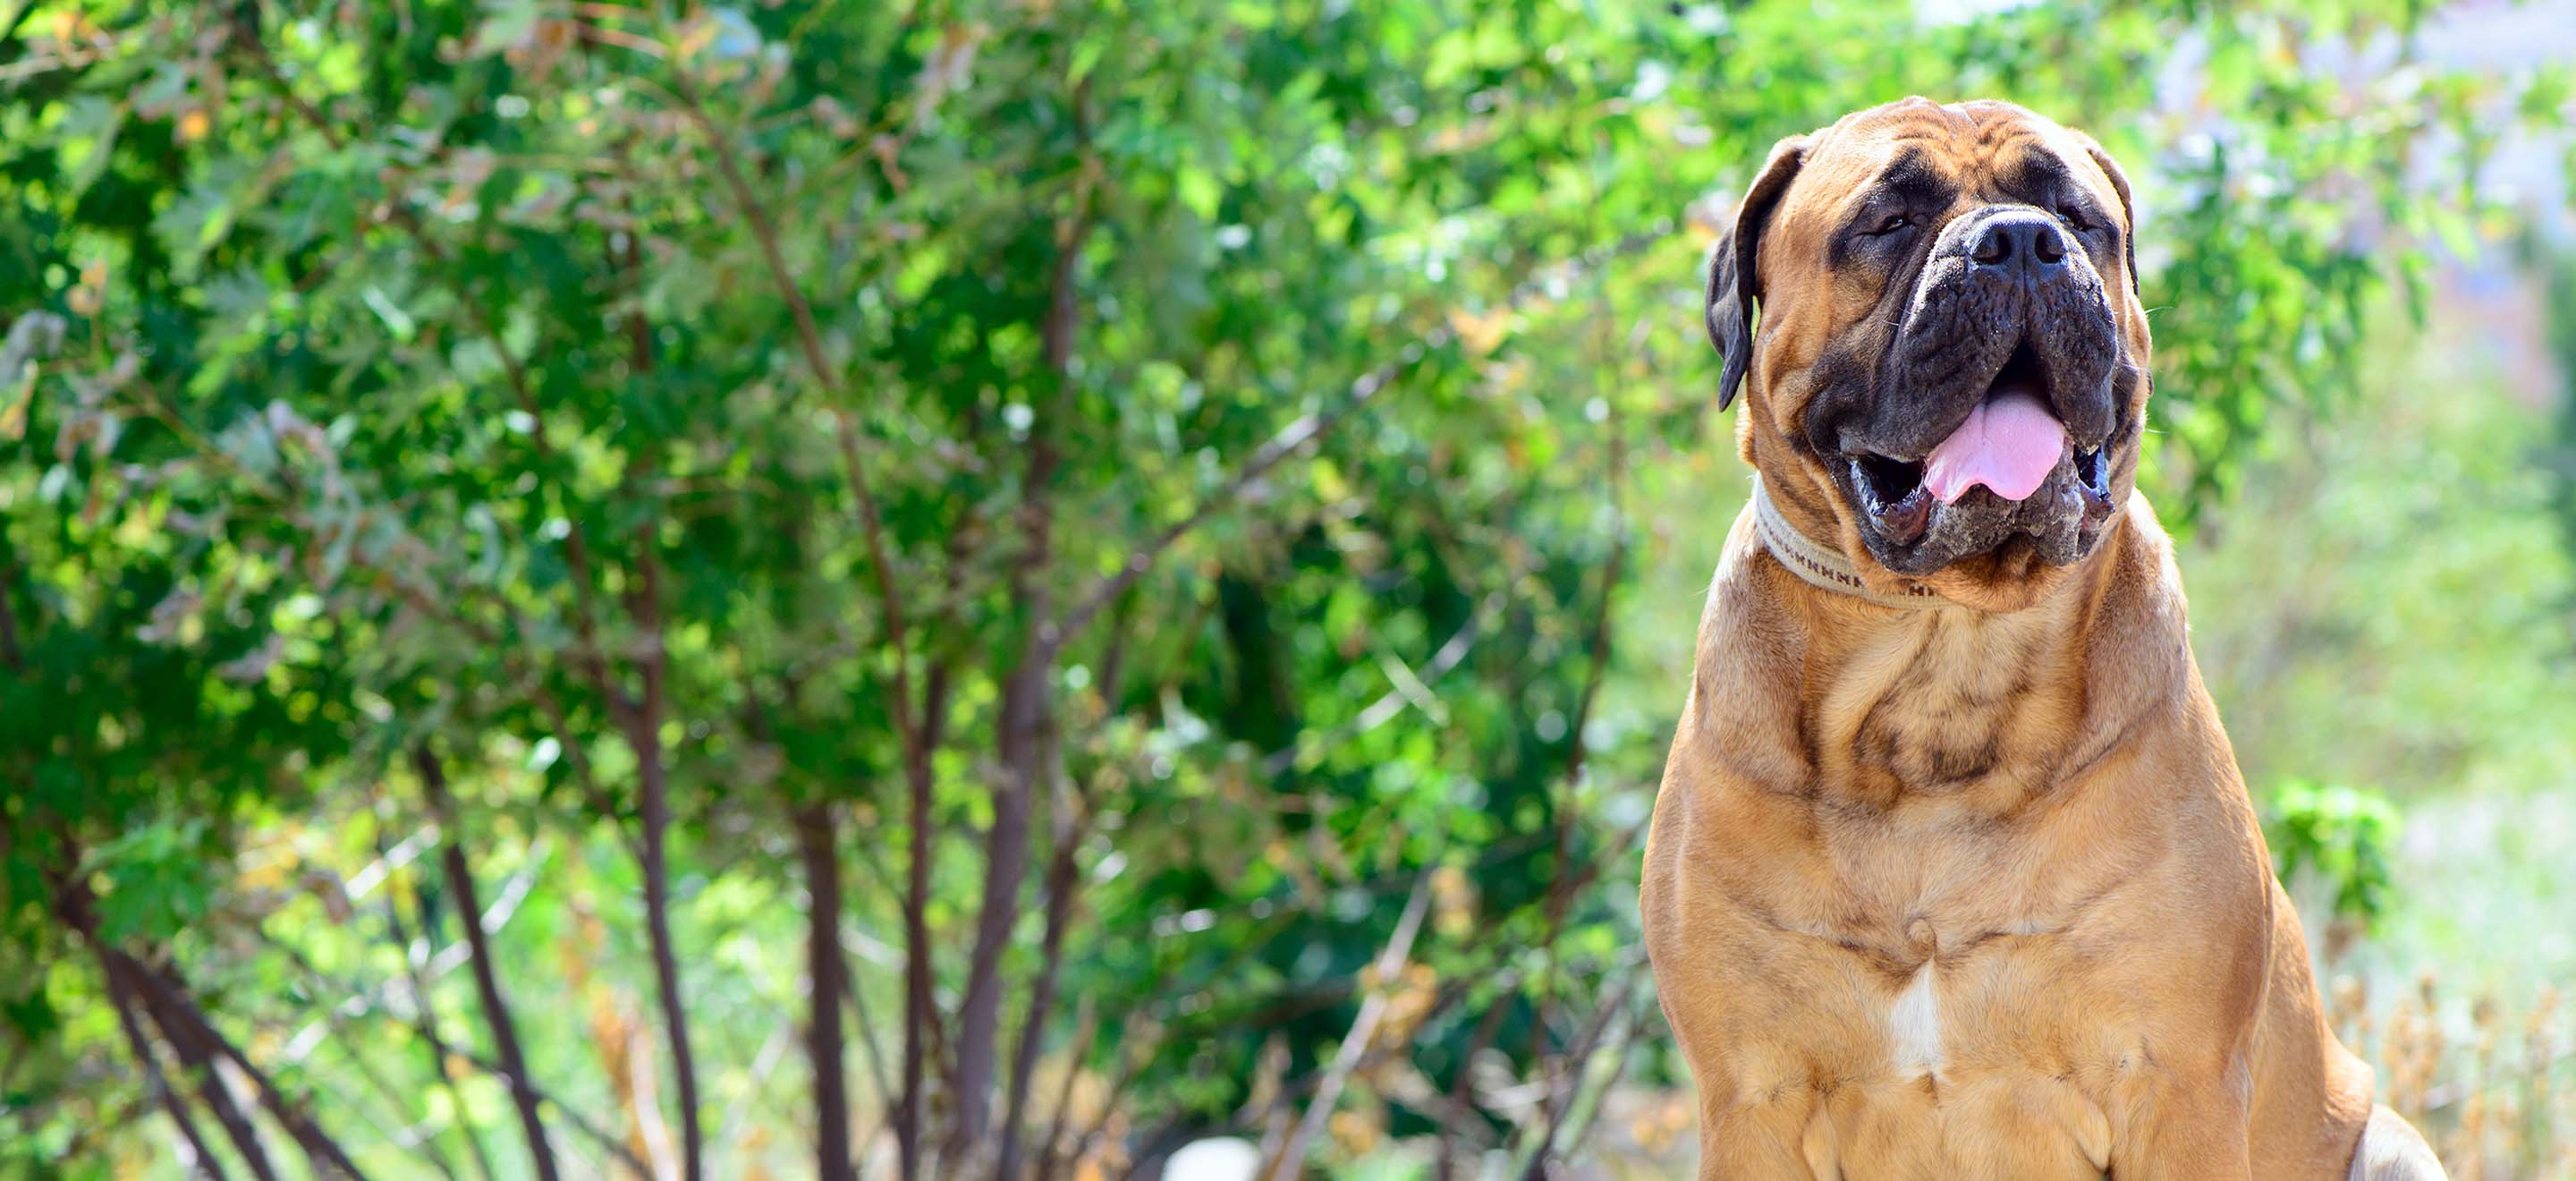 A smiling Bullmastiff dog standing in front of a bush in the yard image